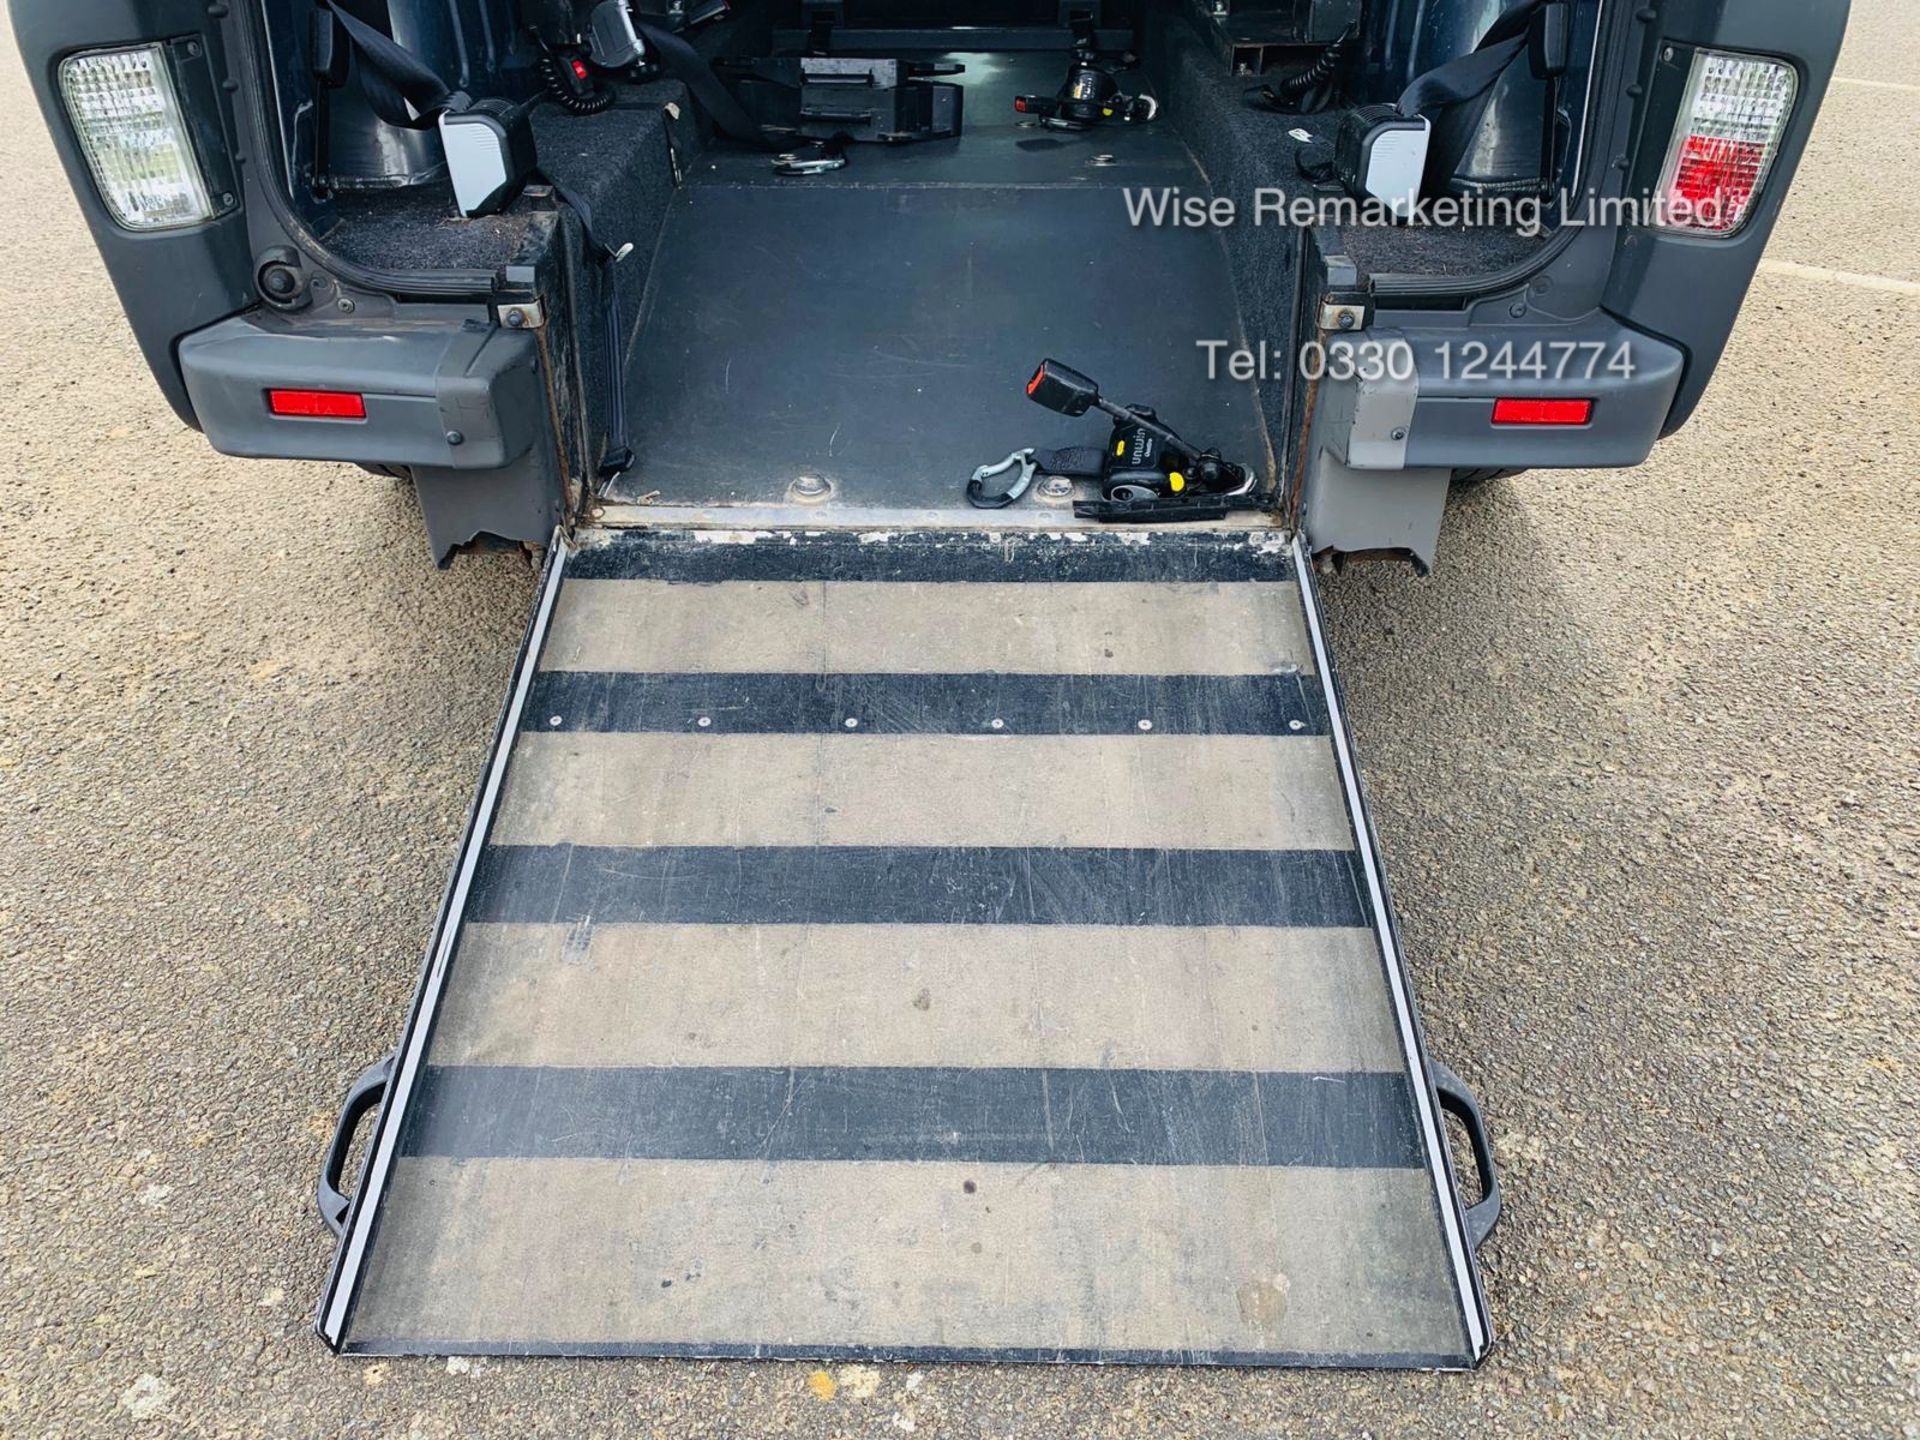 Vauxhall Vivaro 2.0 CDTI 2900 Minibus - 2014 Model - Wheel Chair Access - 1 Owner From New -History - Image 13 of 21